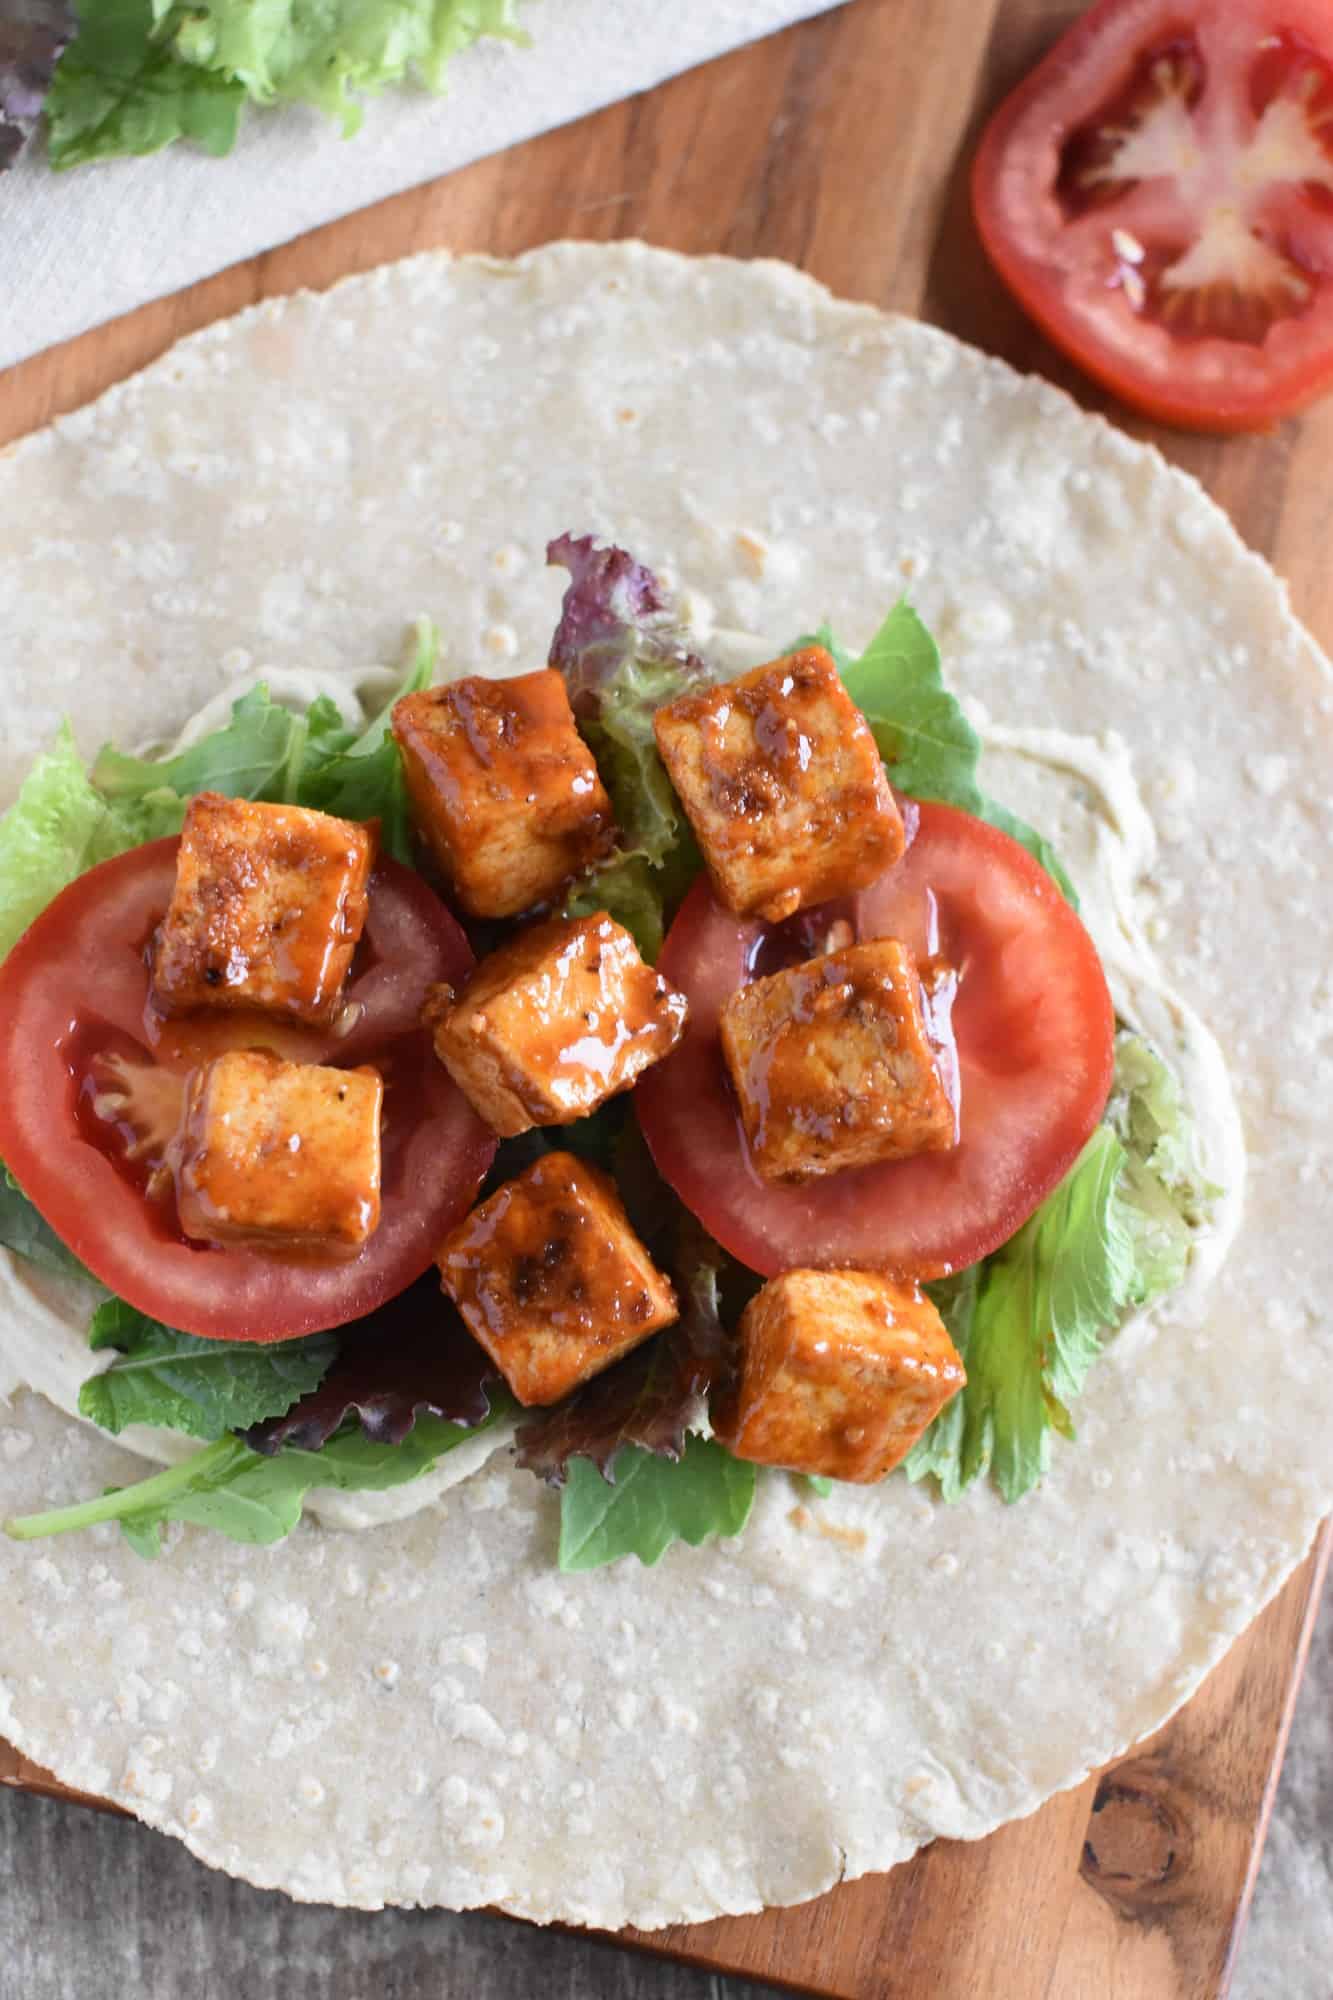 tofu in a wrap with hummus, greens and tomatoes